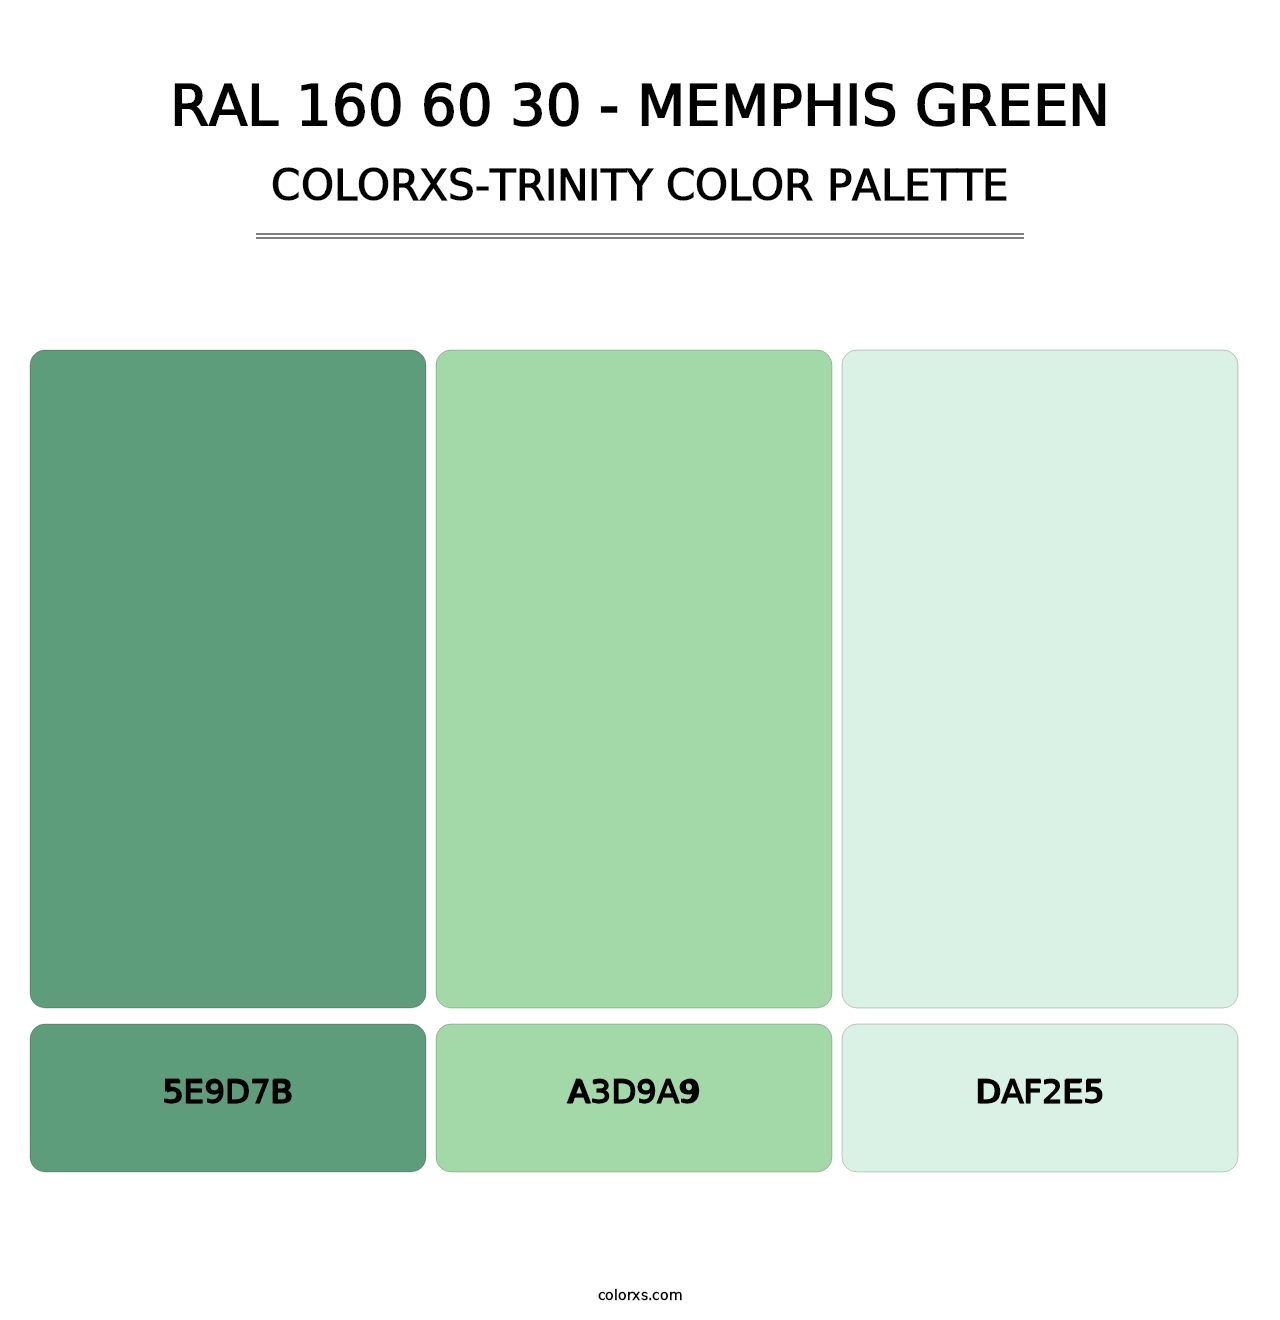 RAL 160 60 30 - Memphis Green - Colorxs Trinity Palette